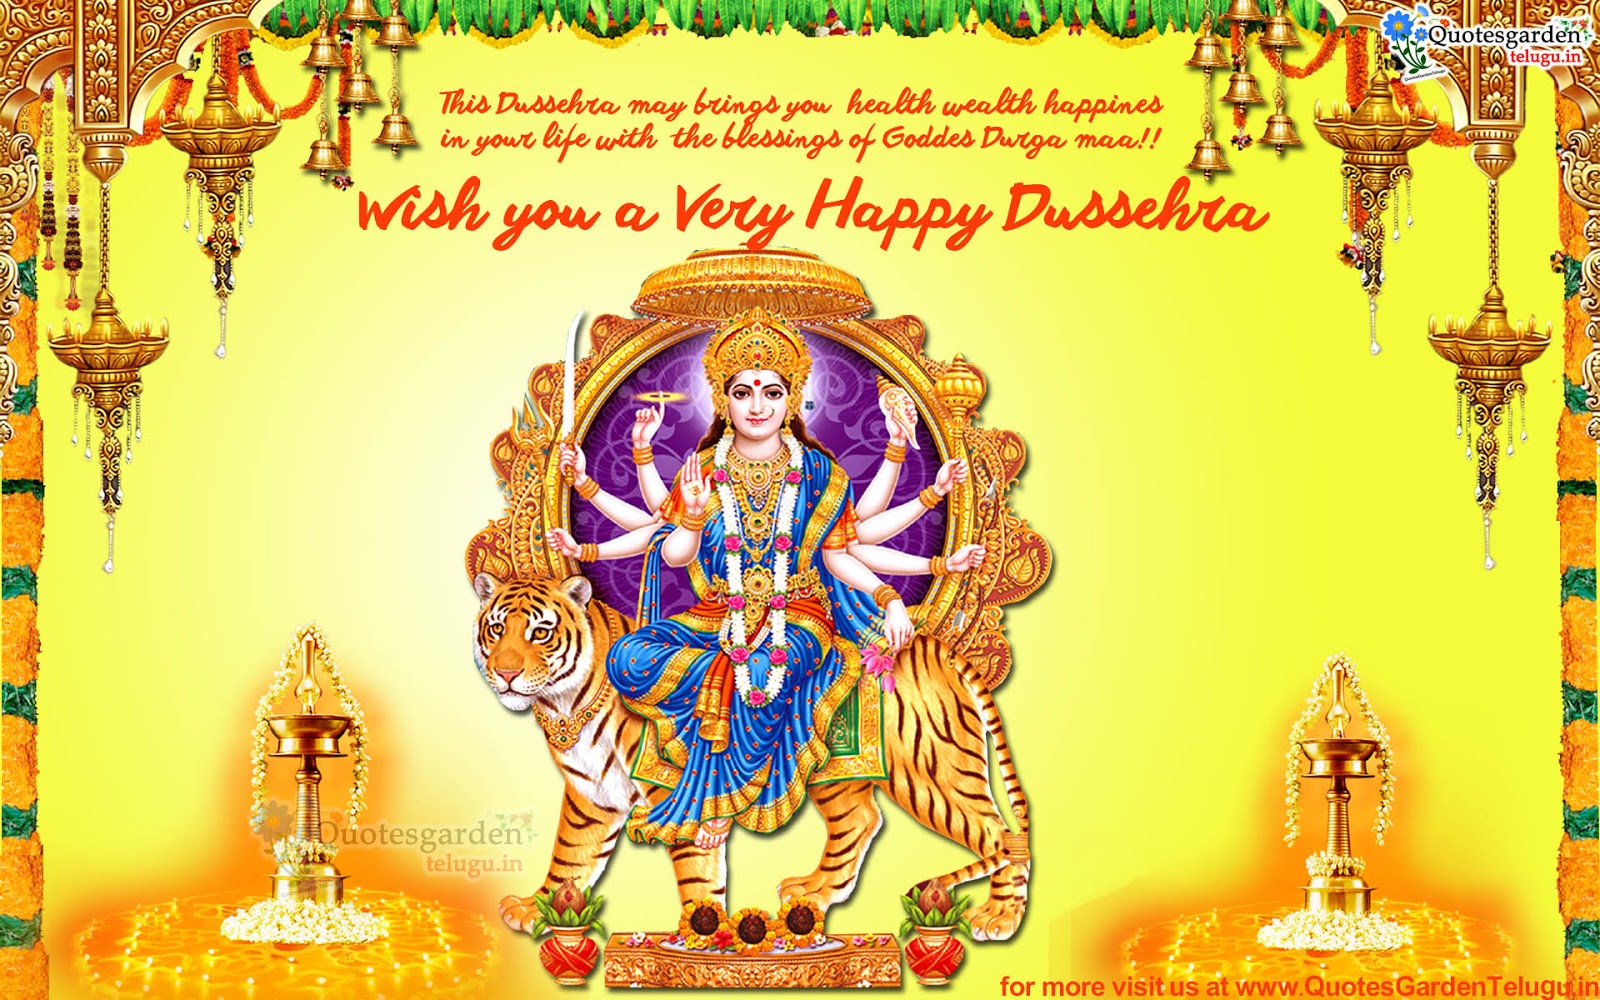 Happy Dussehra Durga Pooja Quotes And Wishes | QUOTES GARDEN ...